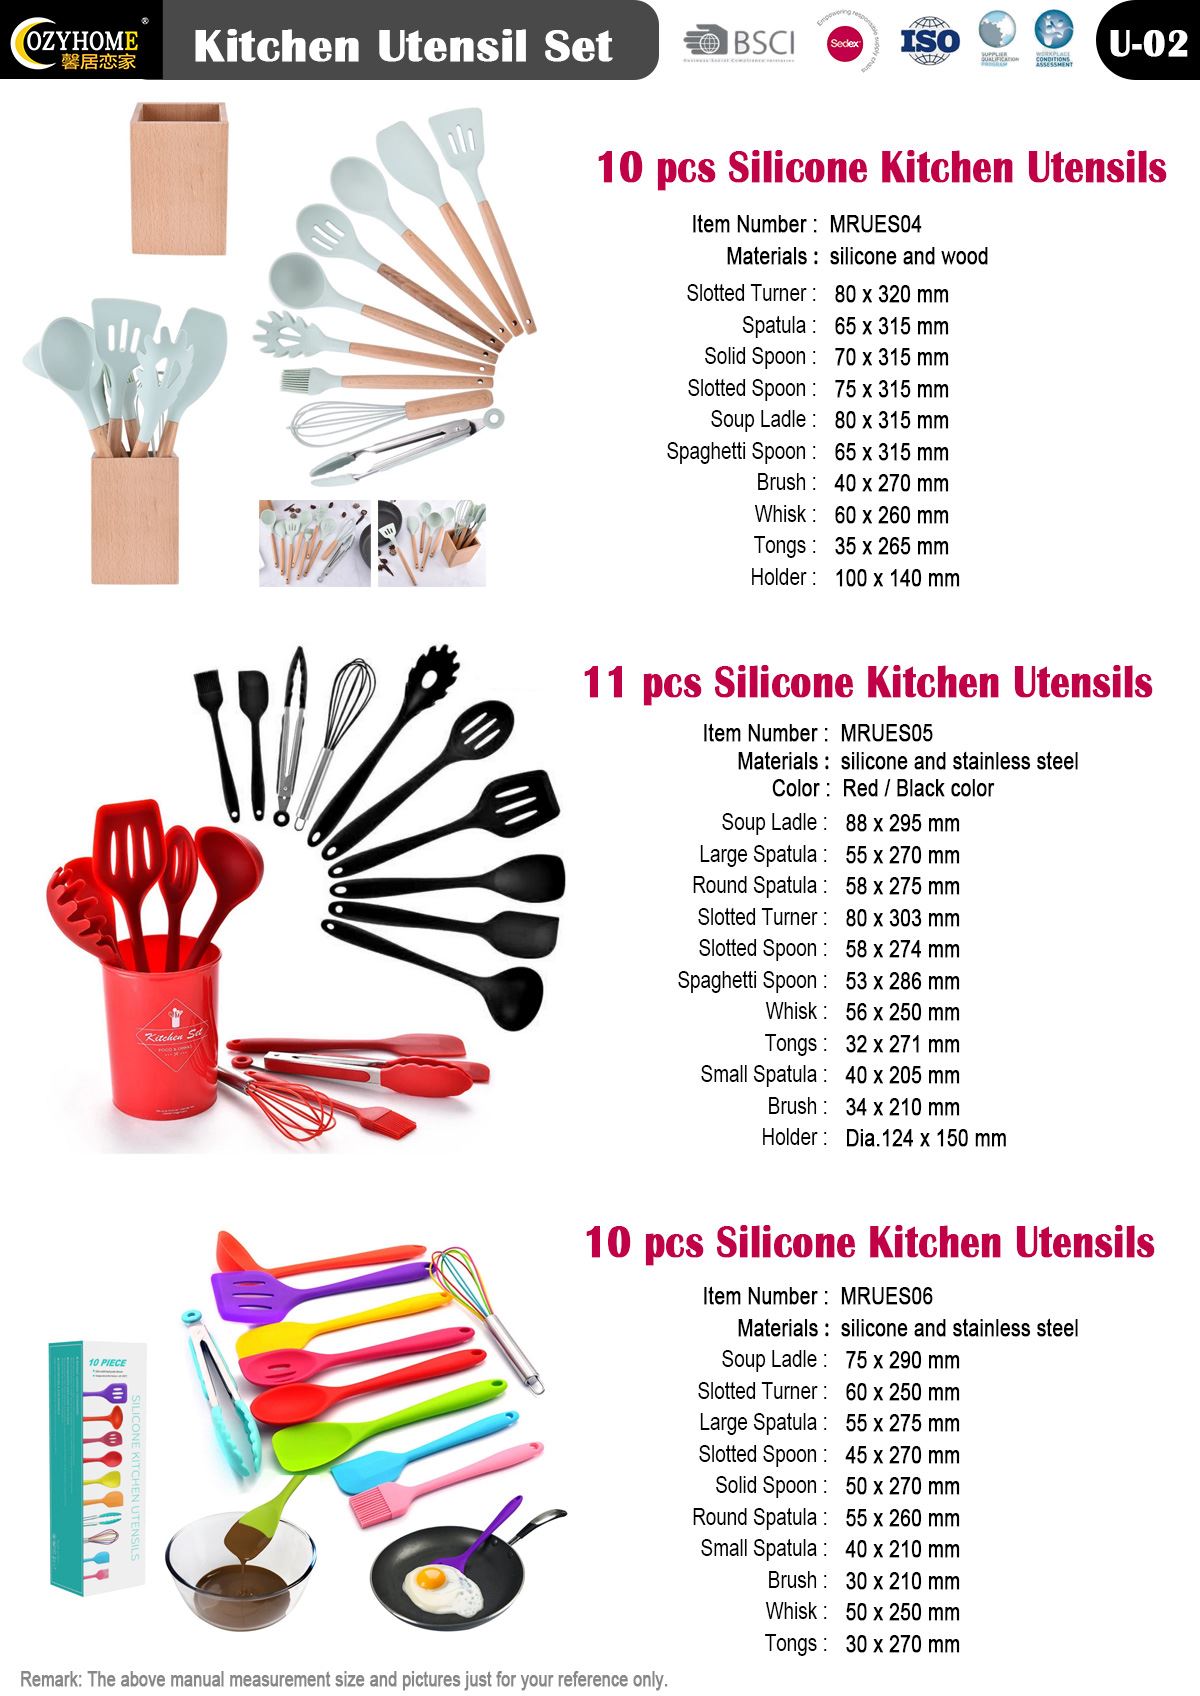 Silicone Kitchen Utensils 2019 Pages: 02